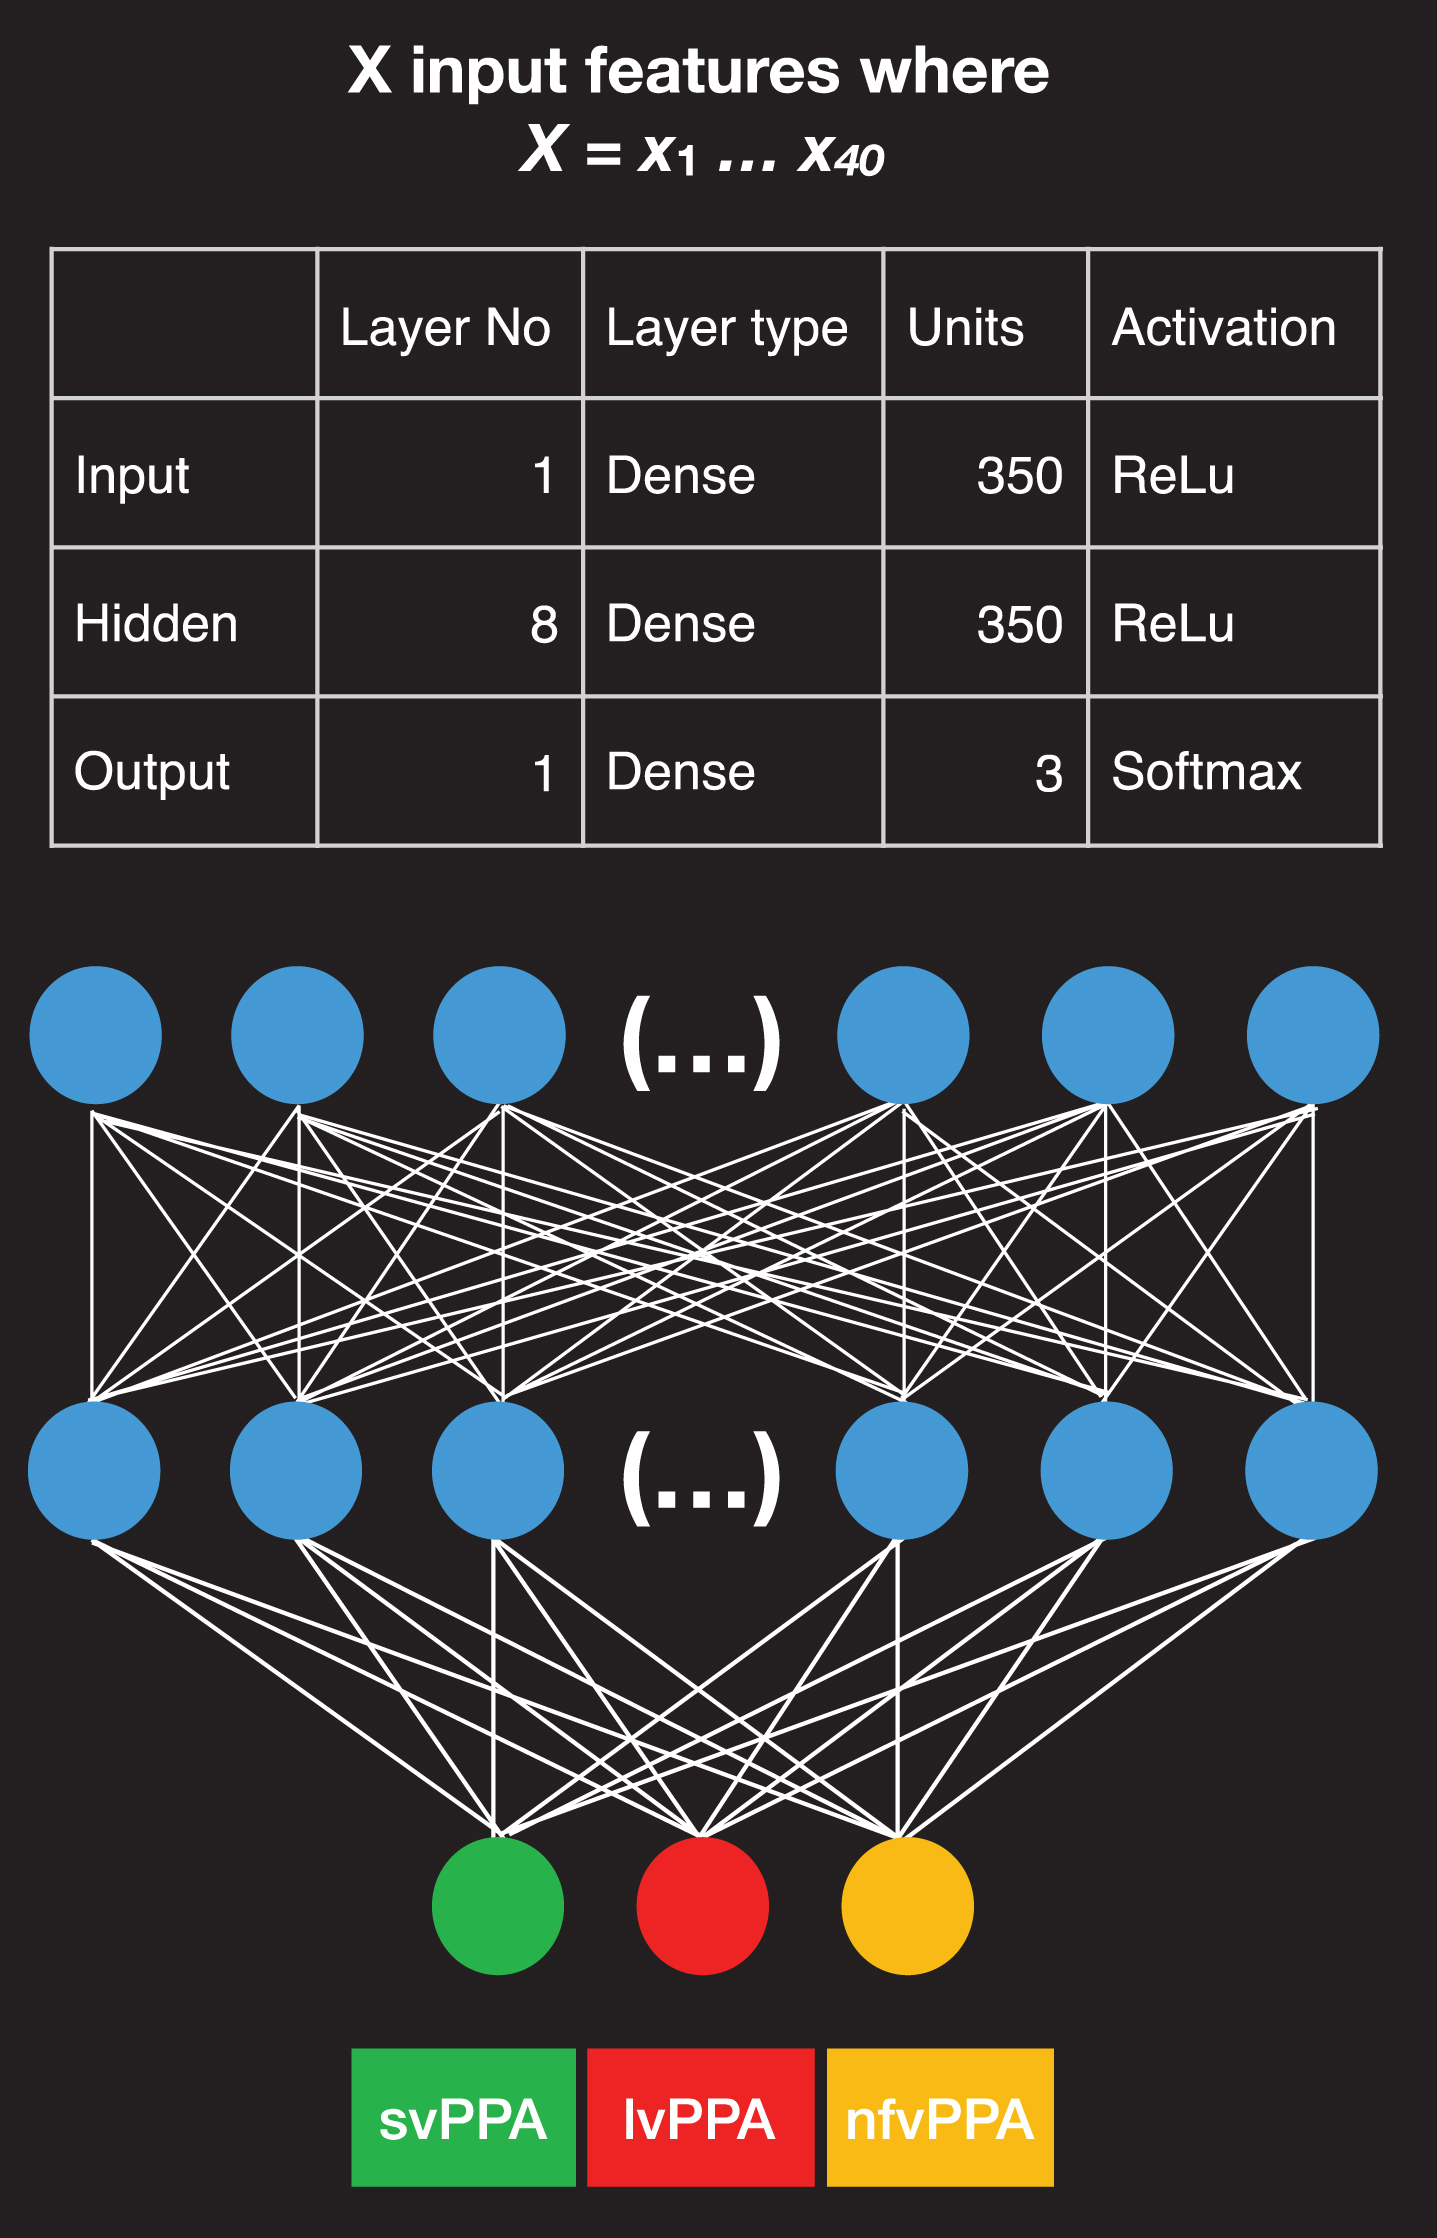 Neural network architecture. Structure of the neural network designed for the study and feature properties, including the number of input features employed, the type and number of units and activation functions for the input, hidden, and output layer. The first layer on top is the input layer and consists of 350 units; 8 layers in the middle containing 350 units are hidden layers, and the final layer contains only three units; here with different colors, when the green is activated it corresponds to the svPPA variant, when the red is activated it corresponds to the lvPPA variant, and when the yellow unit is activated it corresponds to the nfvPPA variant.